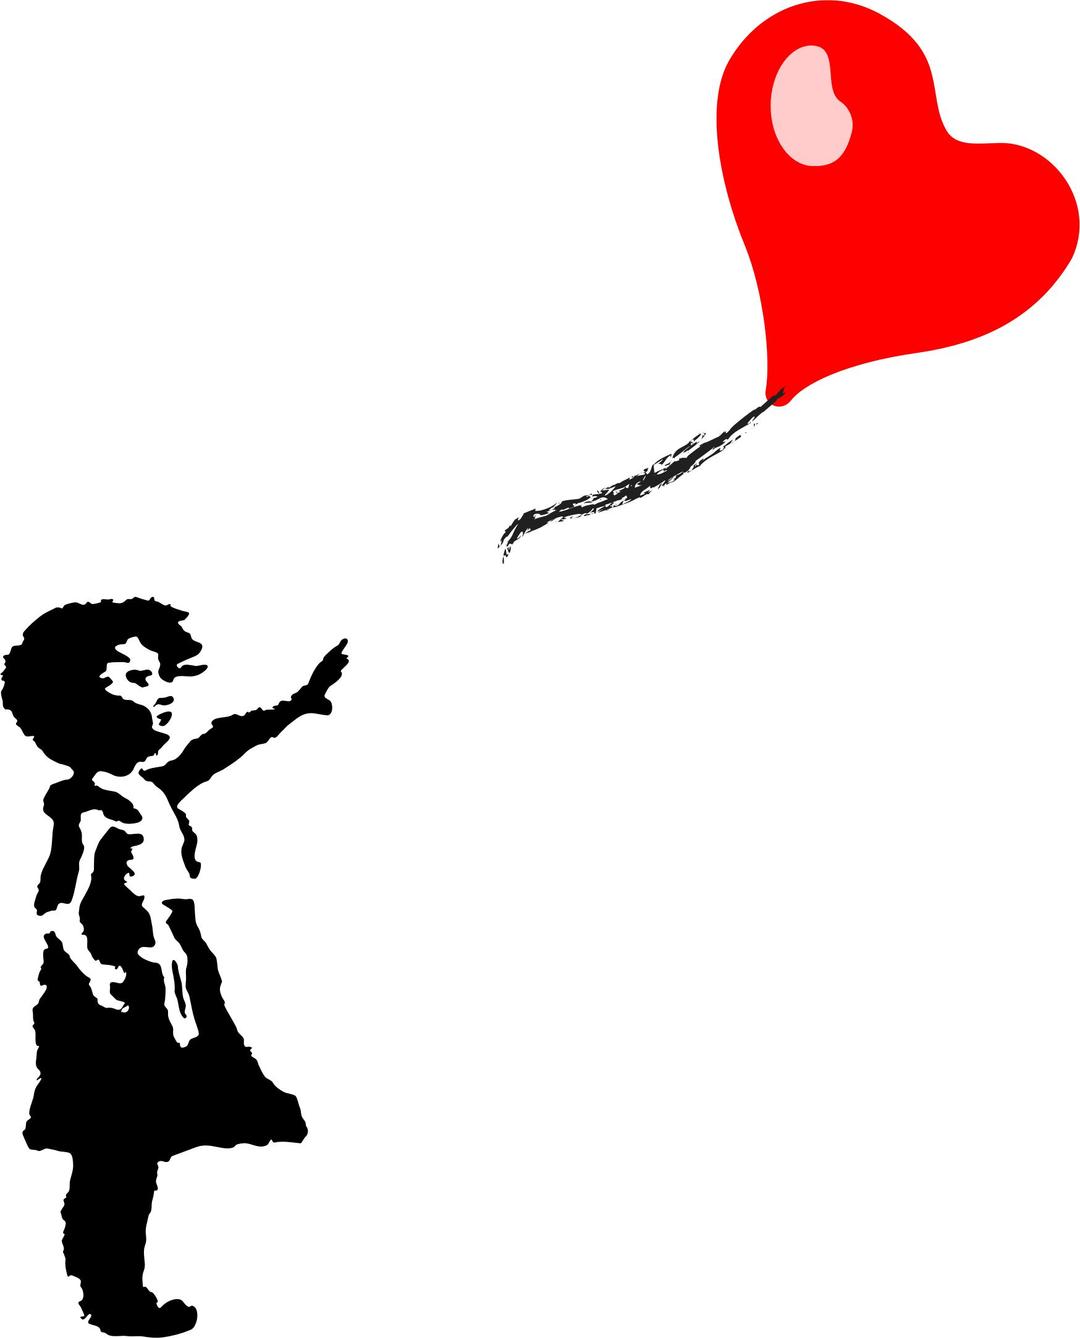 Little Girl And Heart Shaped Balloon png transparent